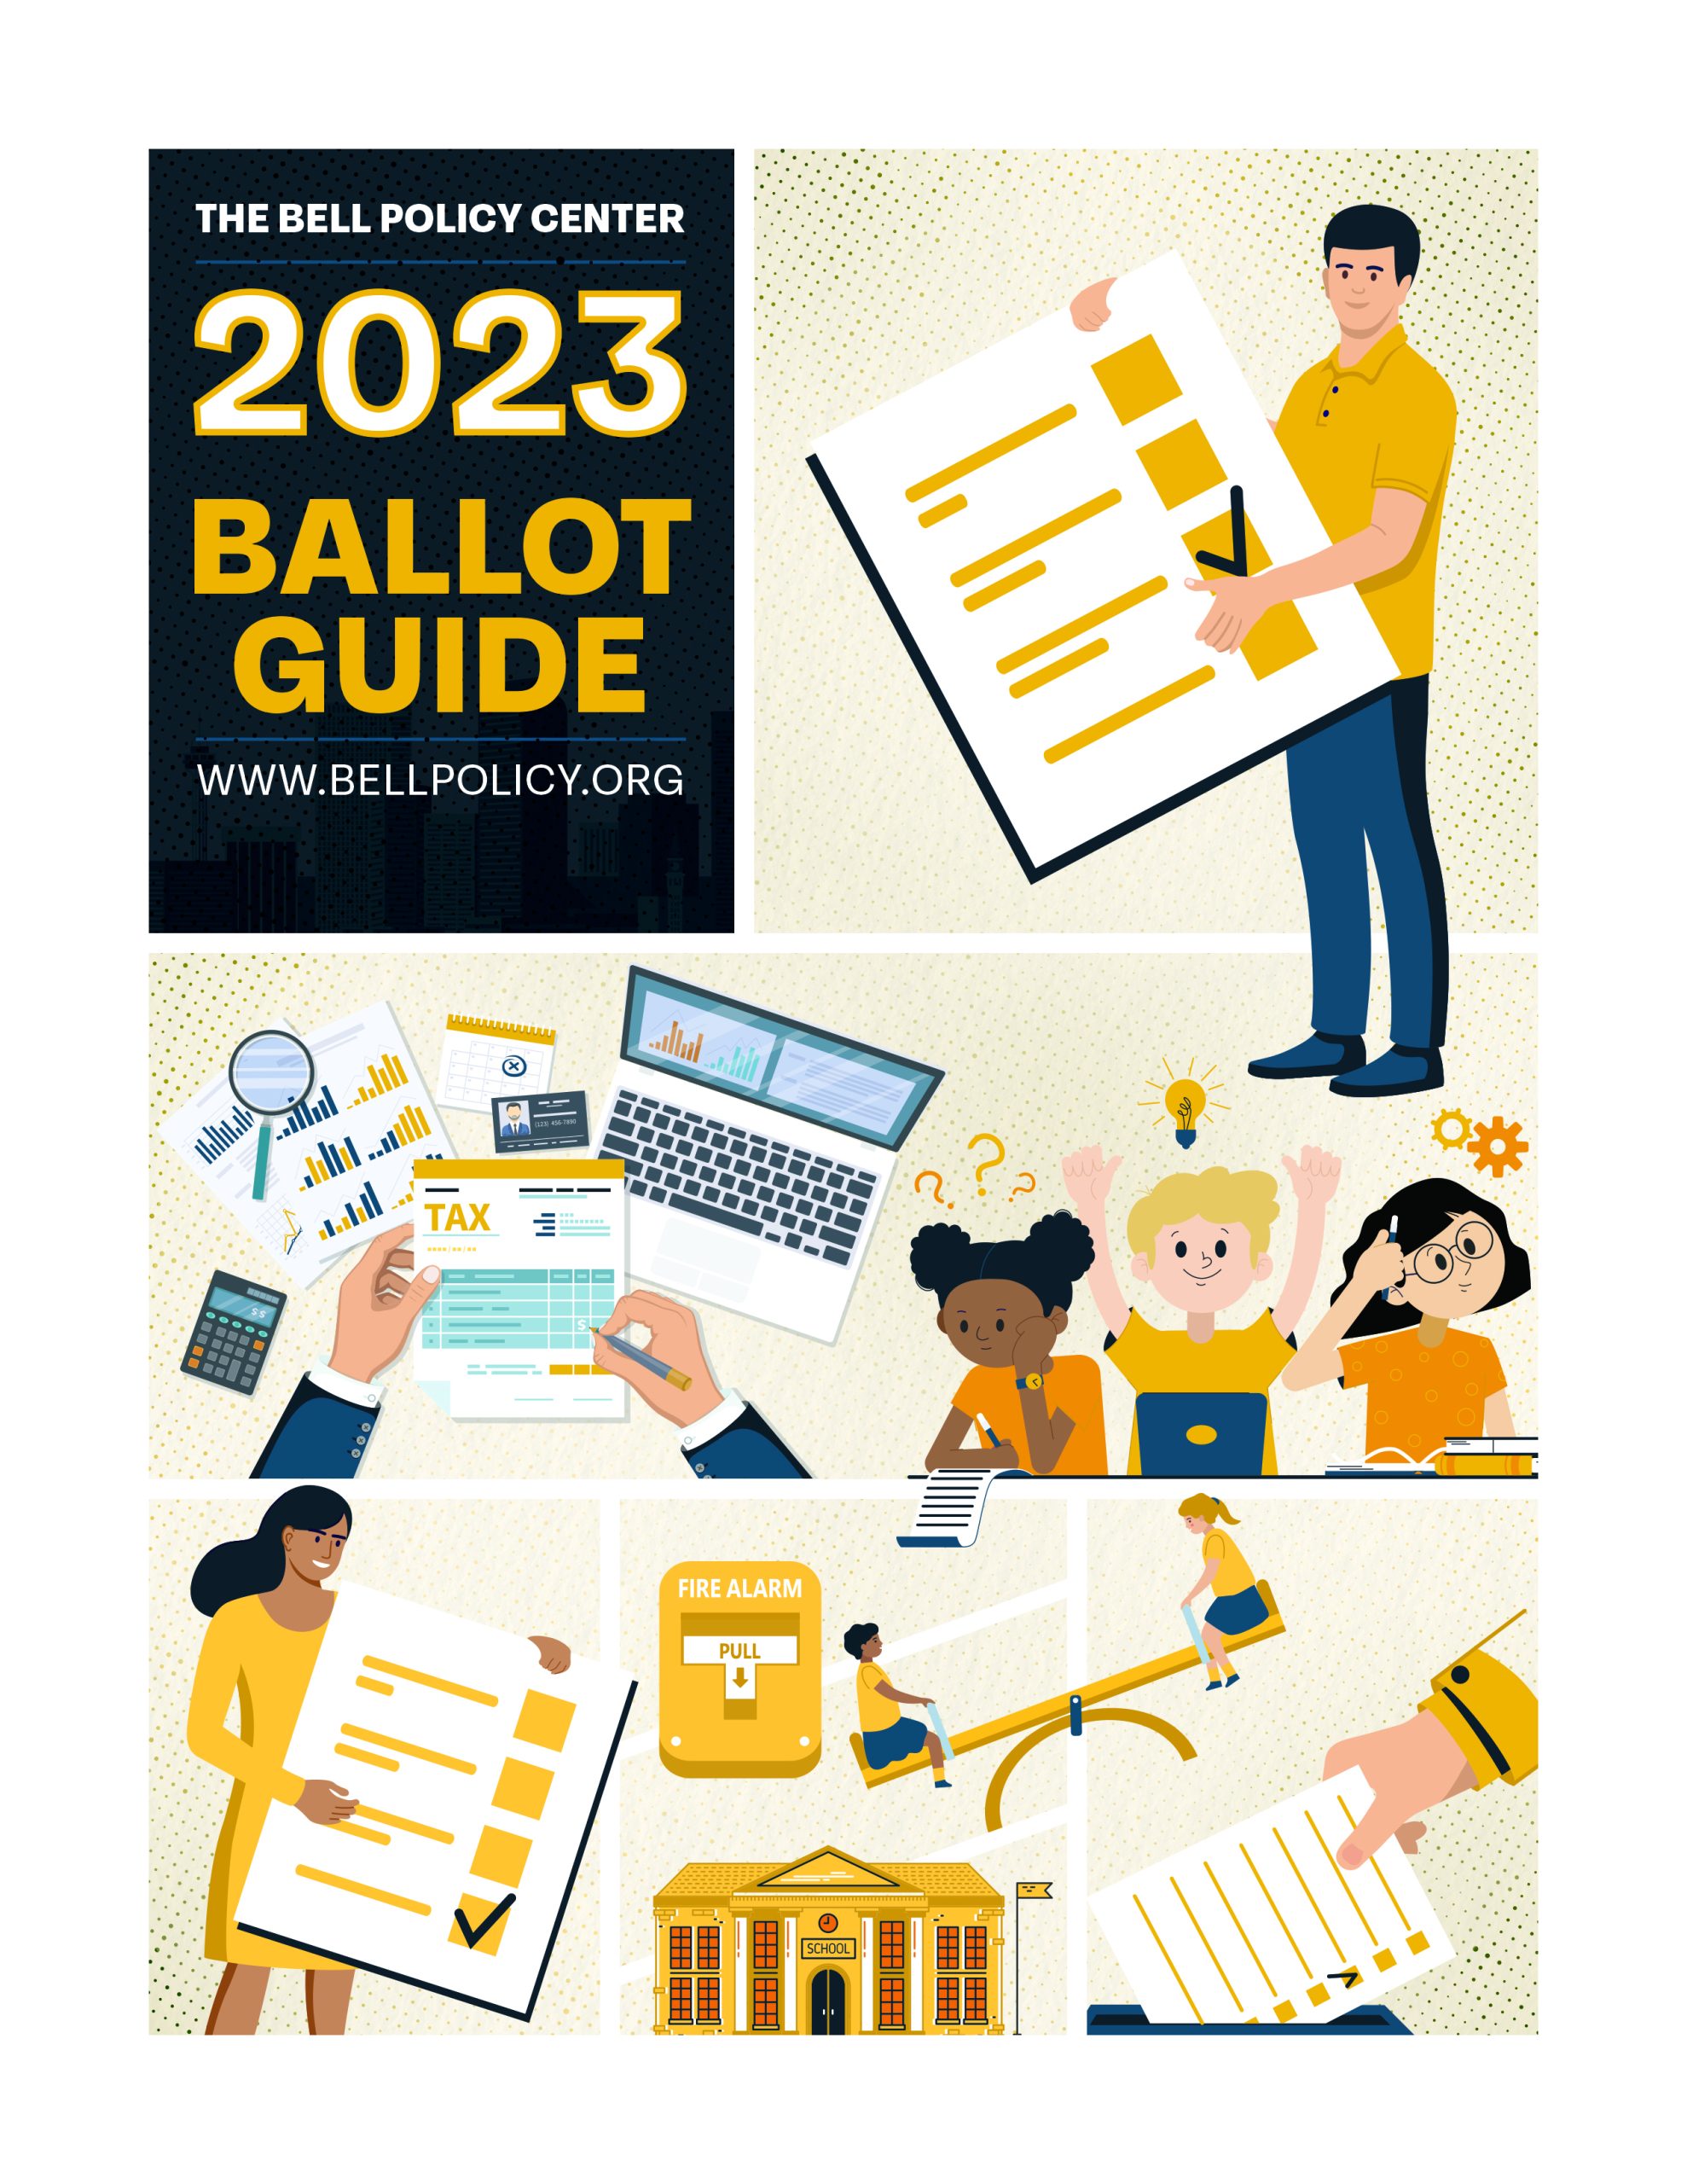 A colorful illustration featuring various scenes related to the electoral process, including people voting, discussing issues, and reviewing the 2023 Colorado Ballot Guide from the bell policy center.